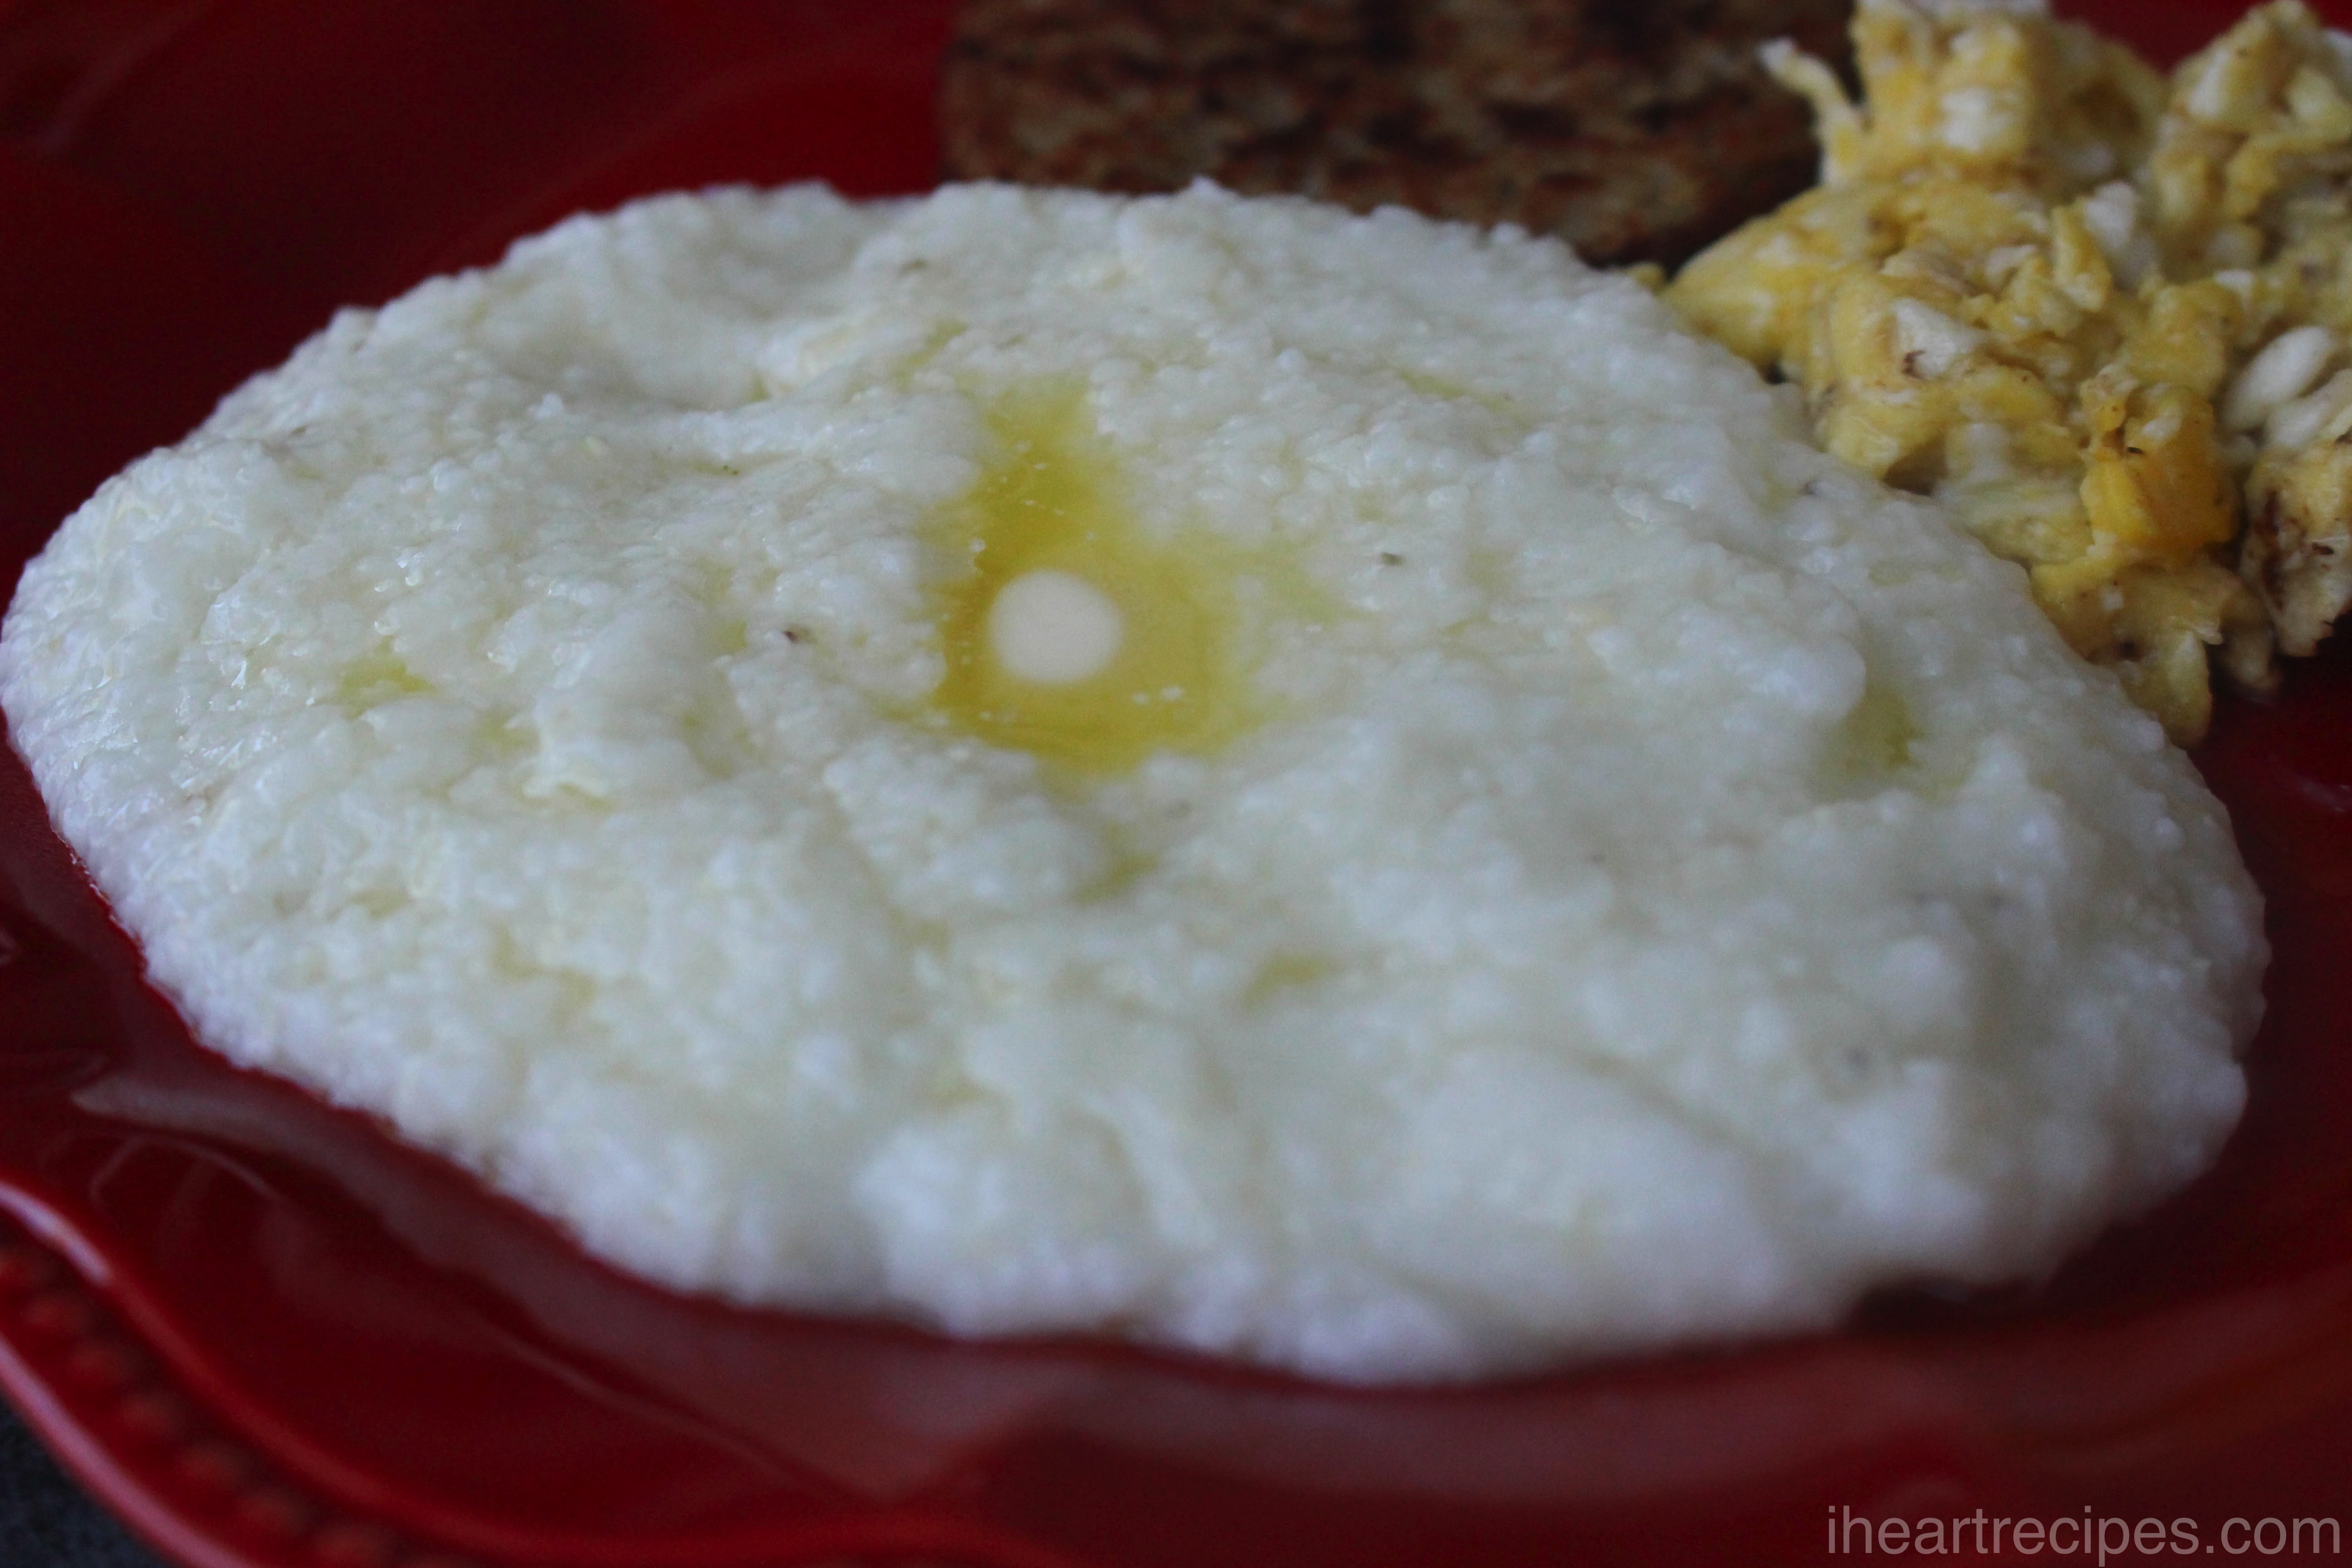 Creamy grits topped with melted butter served on a bright red plate. Serve with savory sausage and tender eggs for a classic southern breakfast!